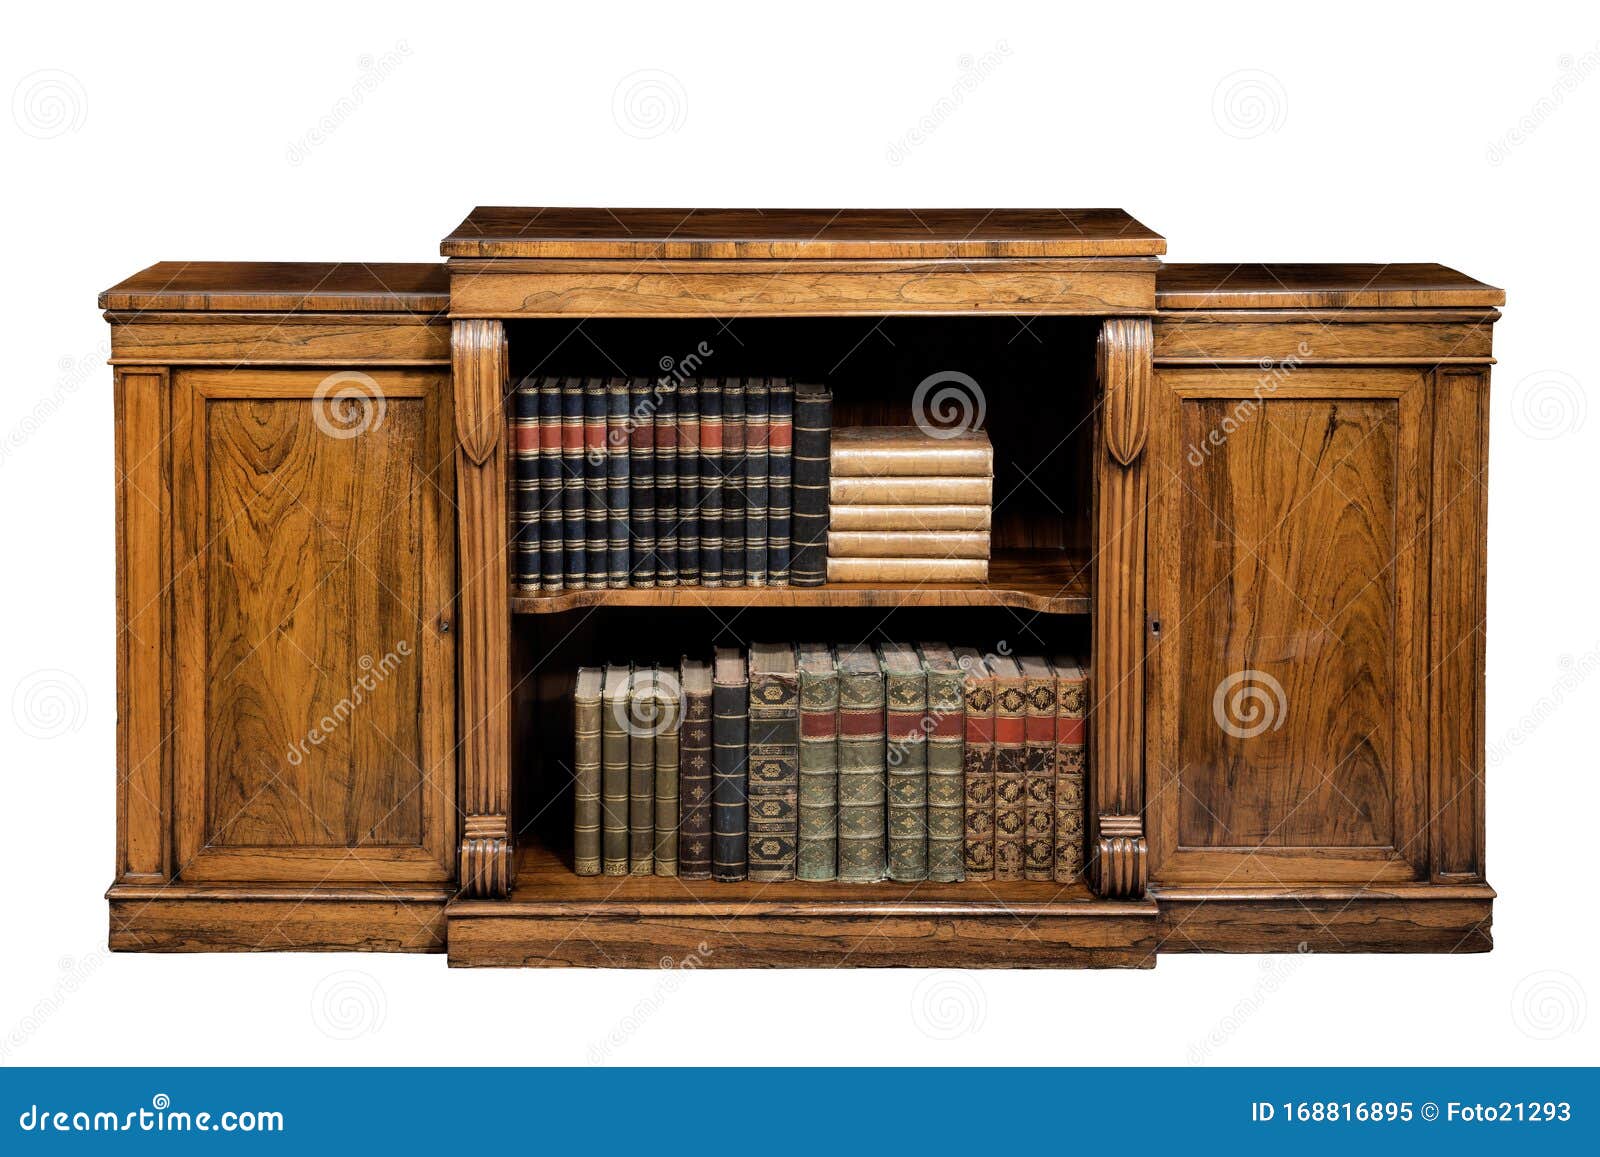 Antique Low Wooden Mahogany Bookcase Cupboard Stock Image Image